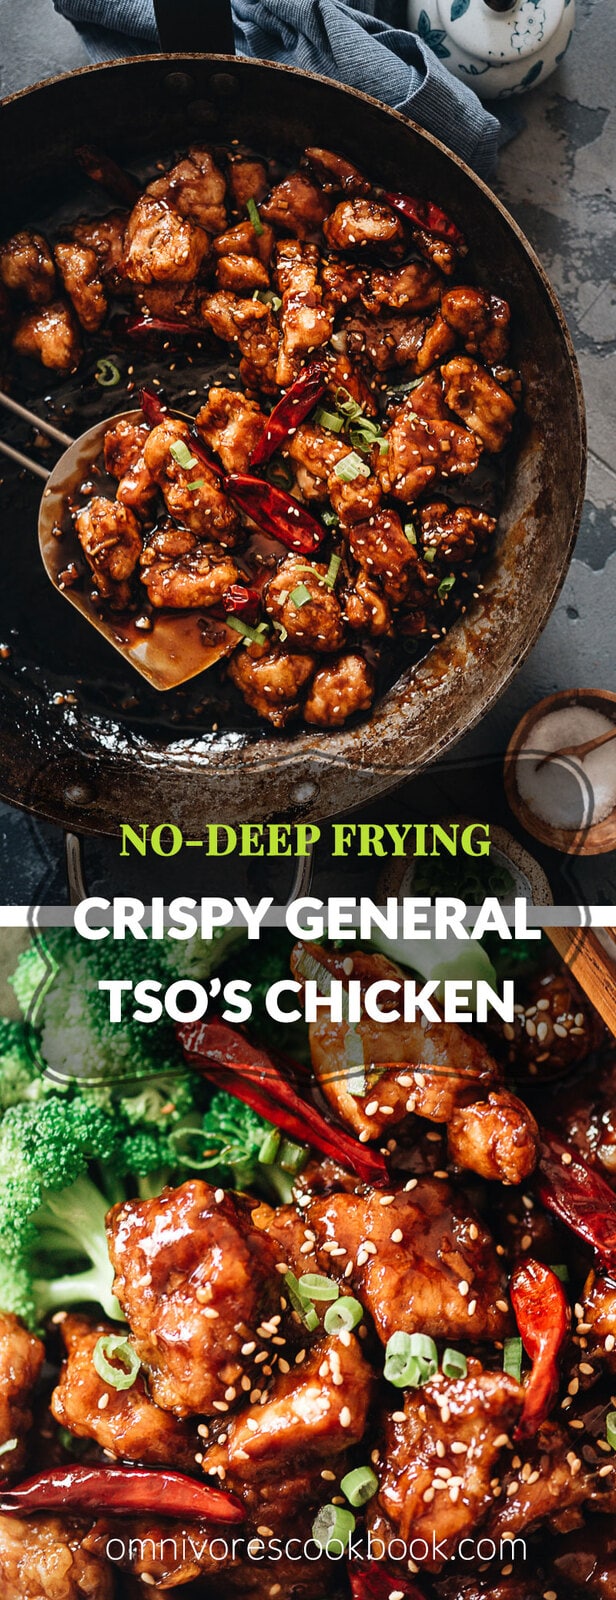 General Tso’s Chicken - An easy General Tso's chicken recipe that yields crispy chicken without deep-frying, served with a sticky, tangy, and sweet sauce. It also uses much less sugar while maintaining a great bold taste. Once you’ve tried it, you’ll skip takeout next time because it’s so easy to make in your own kitchen. {Gluten-Free Adaptable}